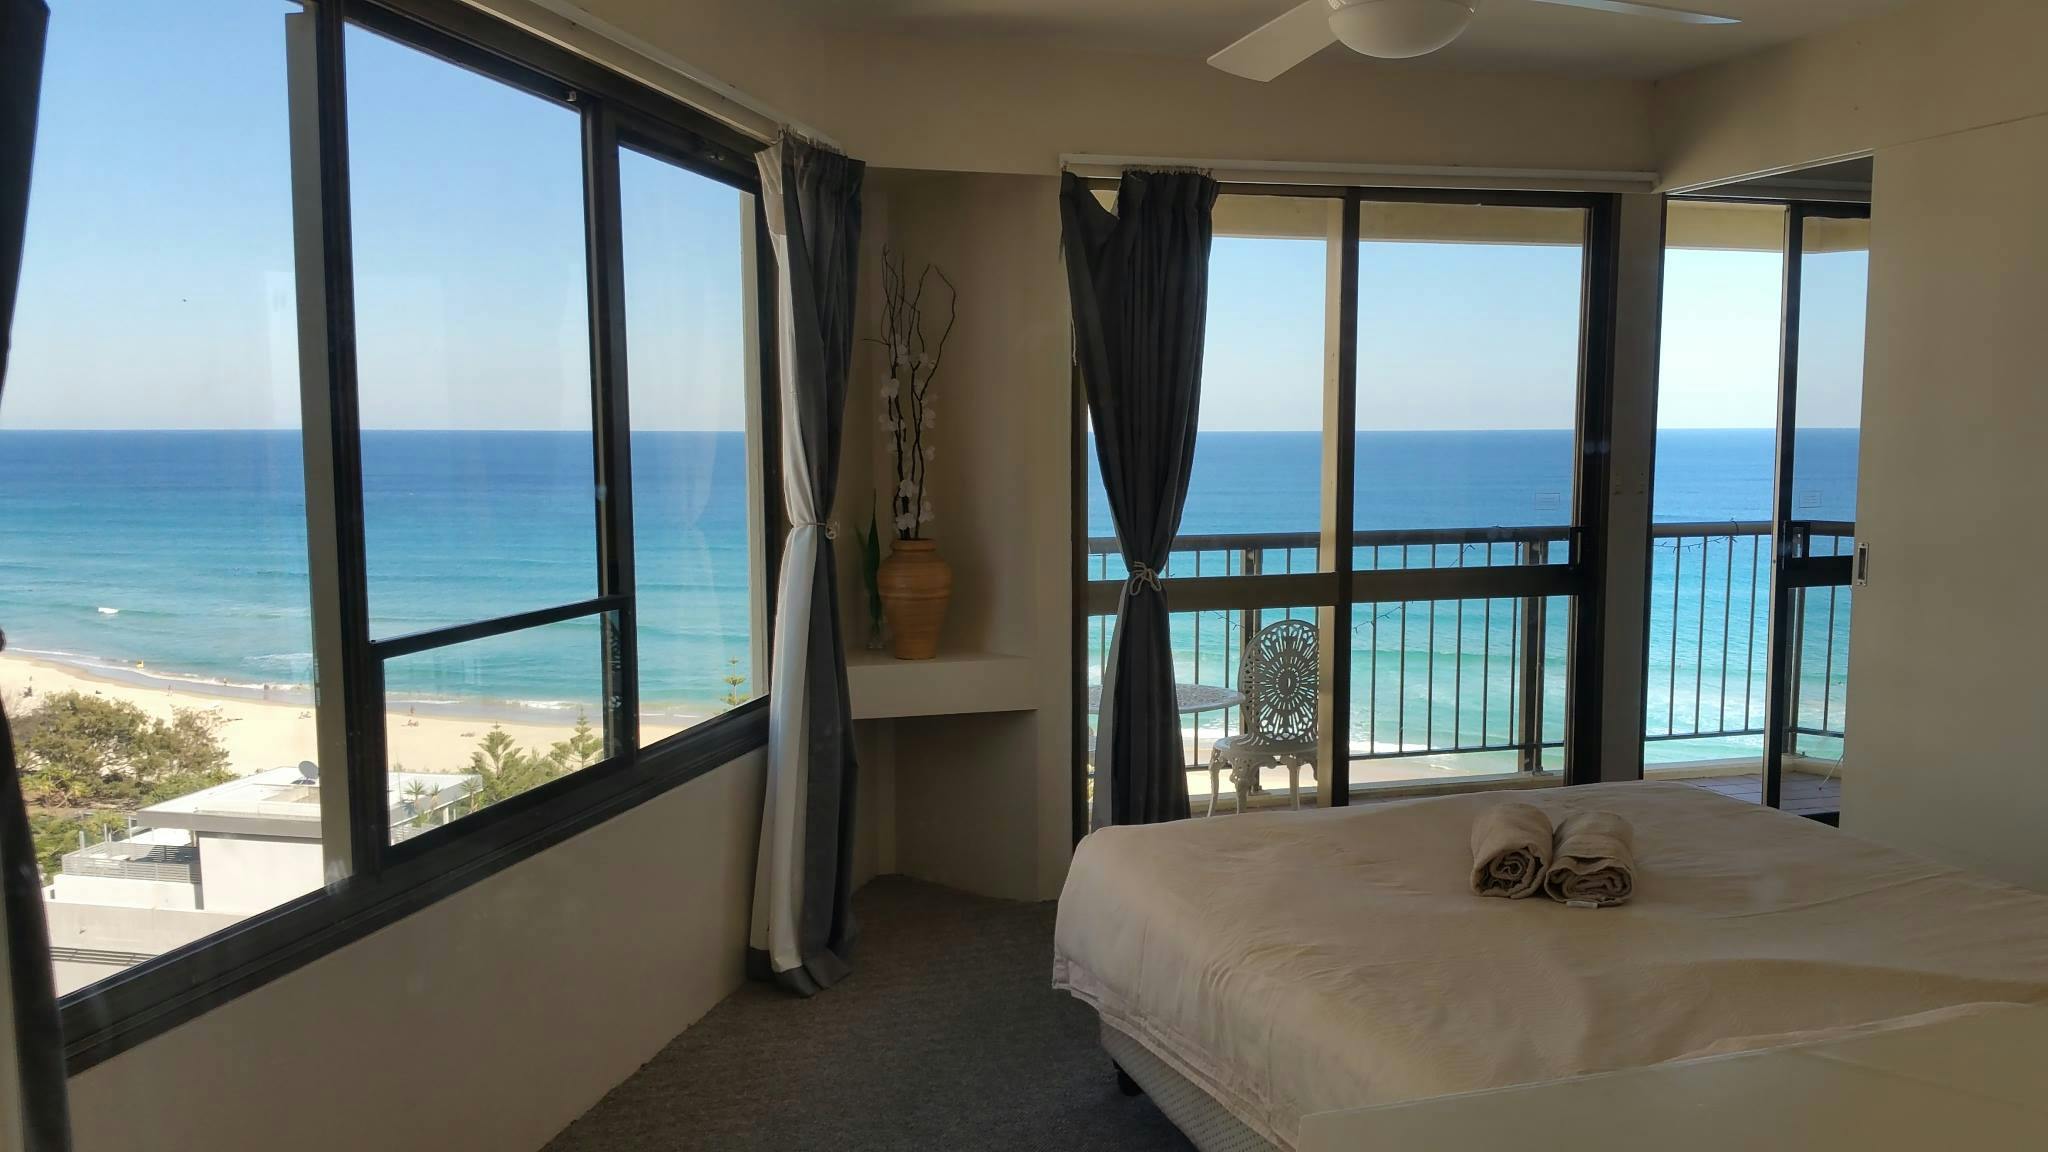 Full Ocean view from room in Surfers Paradise beach, Gold Coast, Queensland, Australia